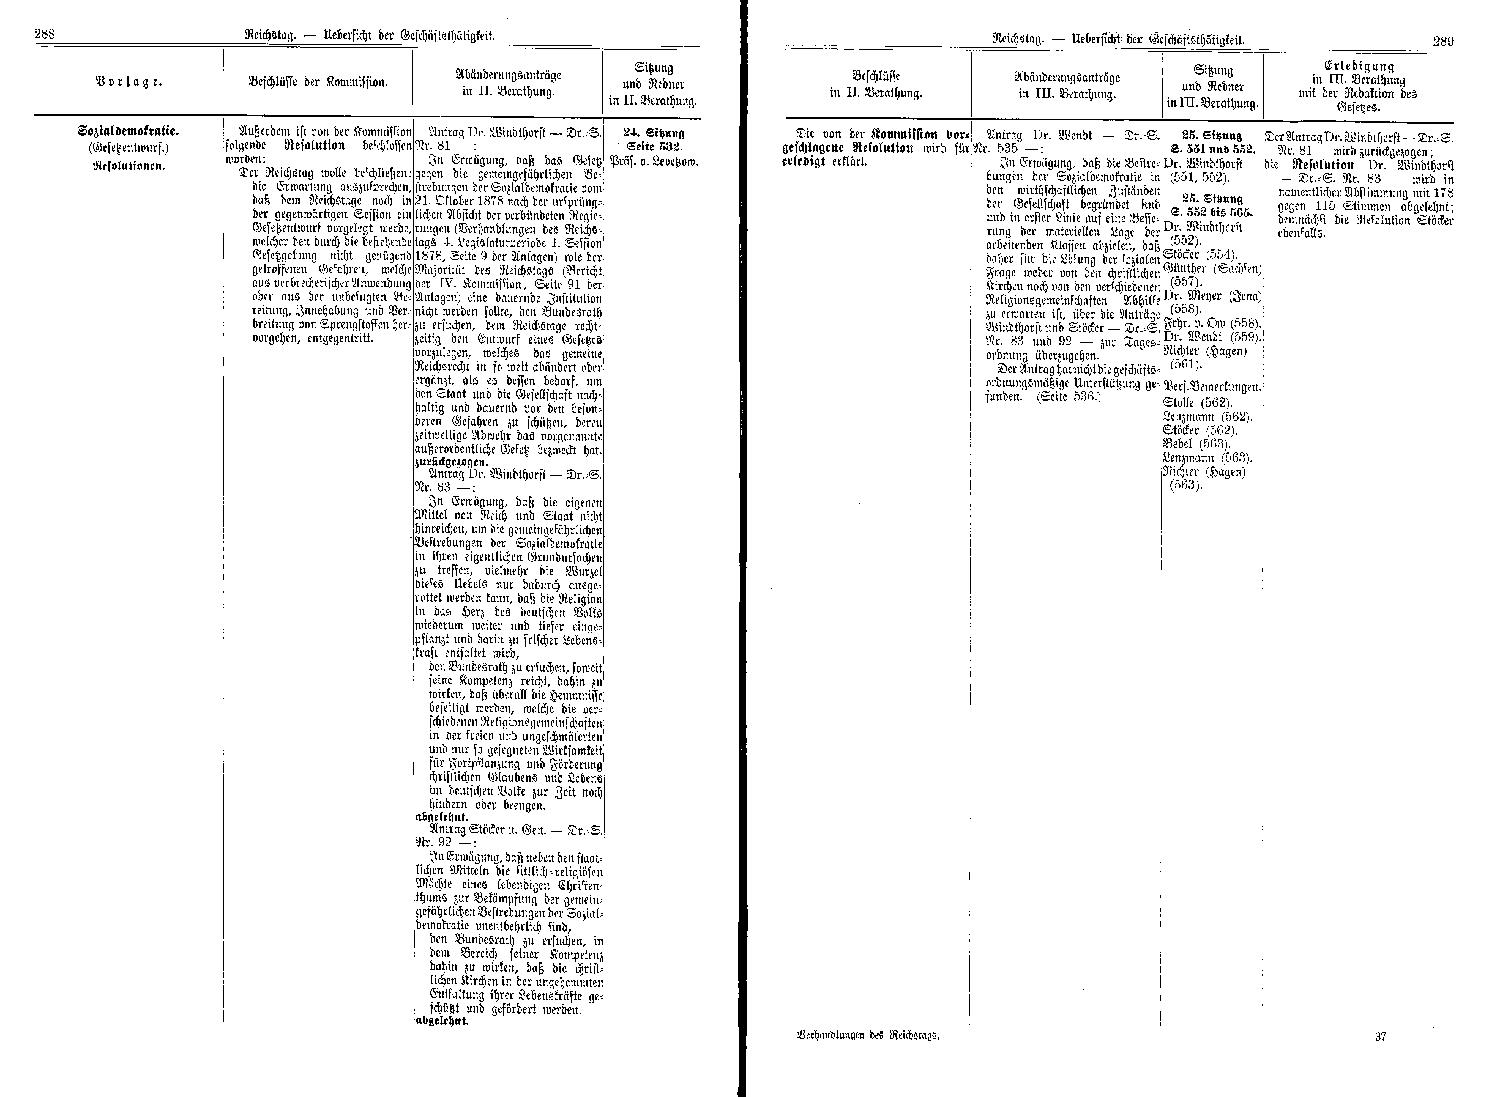 Scan of page 288-289